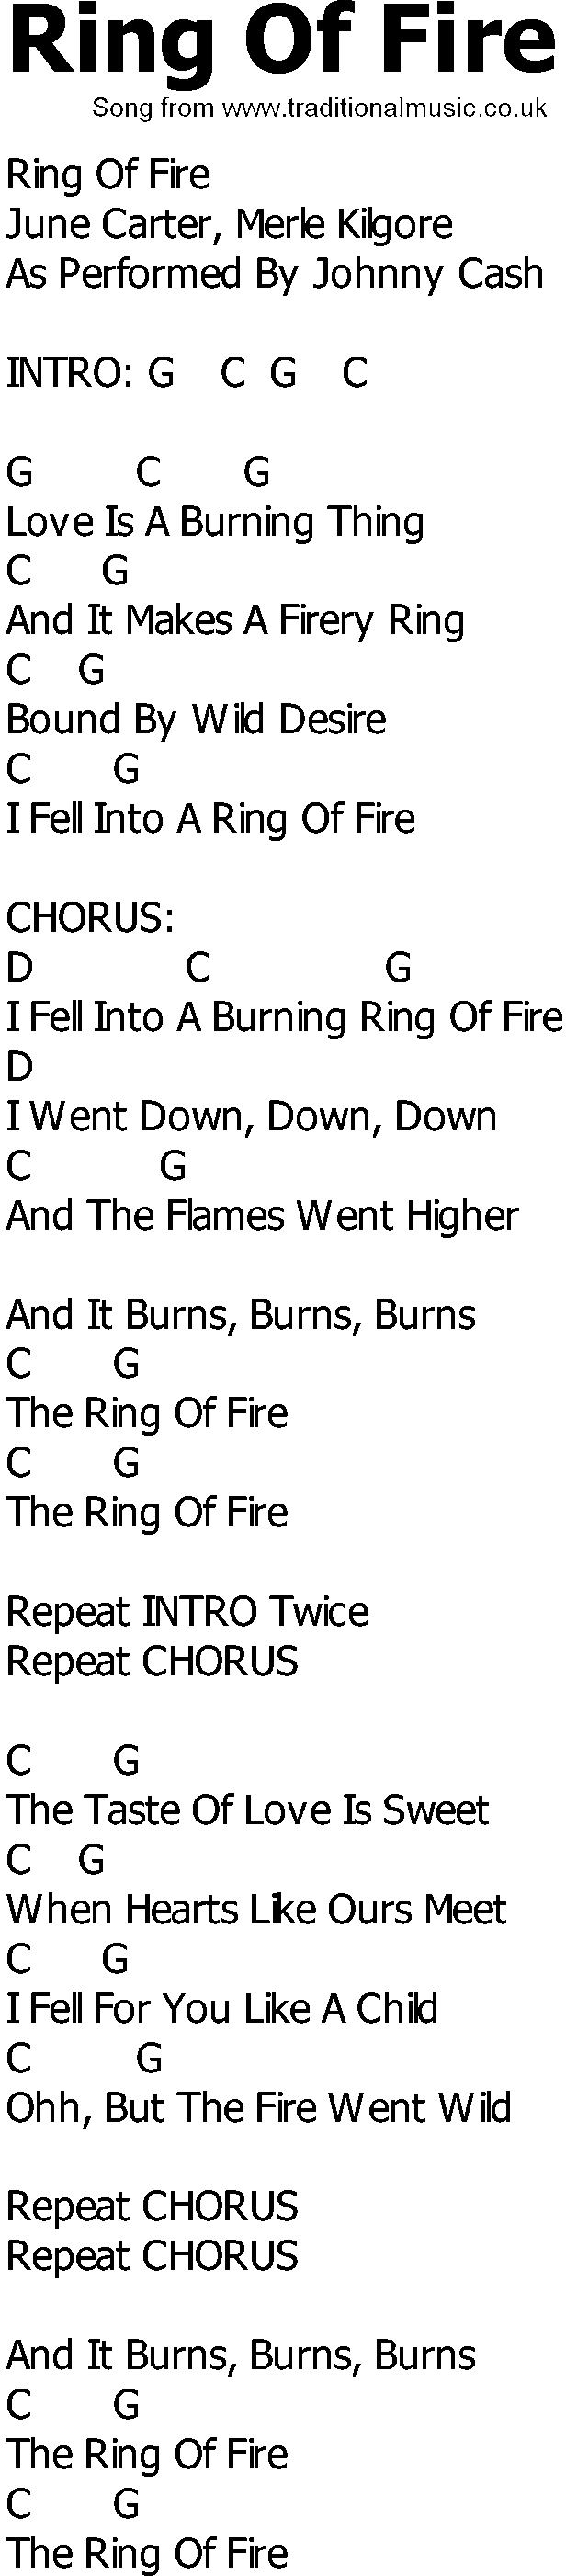 Ring Of Fire Chords Old Country Song Lyrics With Chords Ring Of Fire